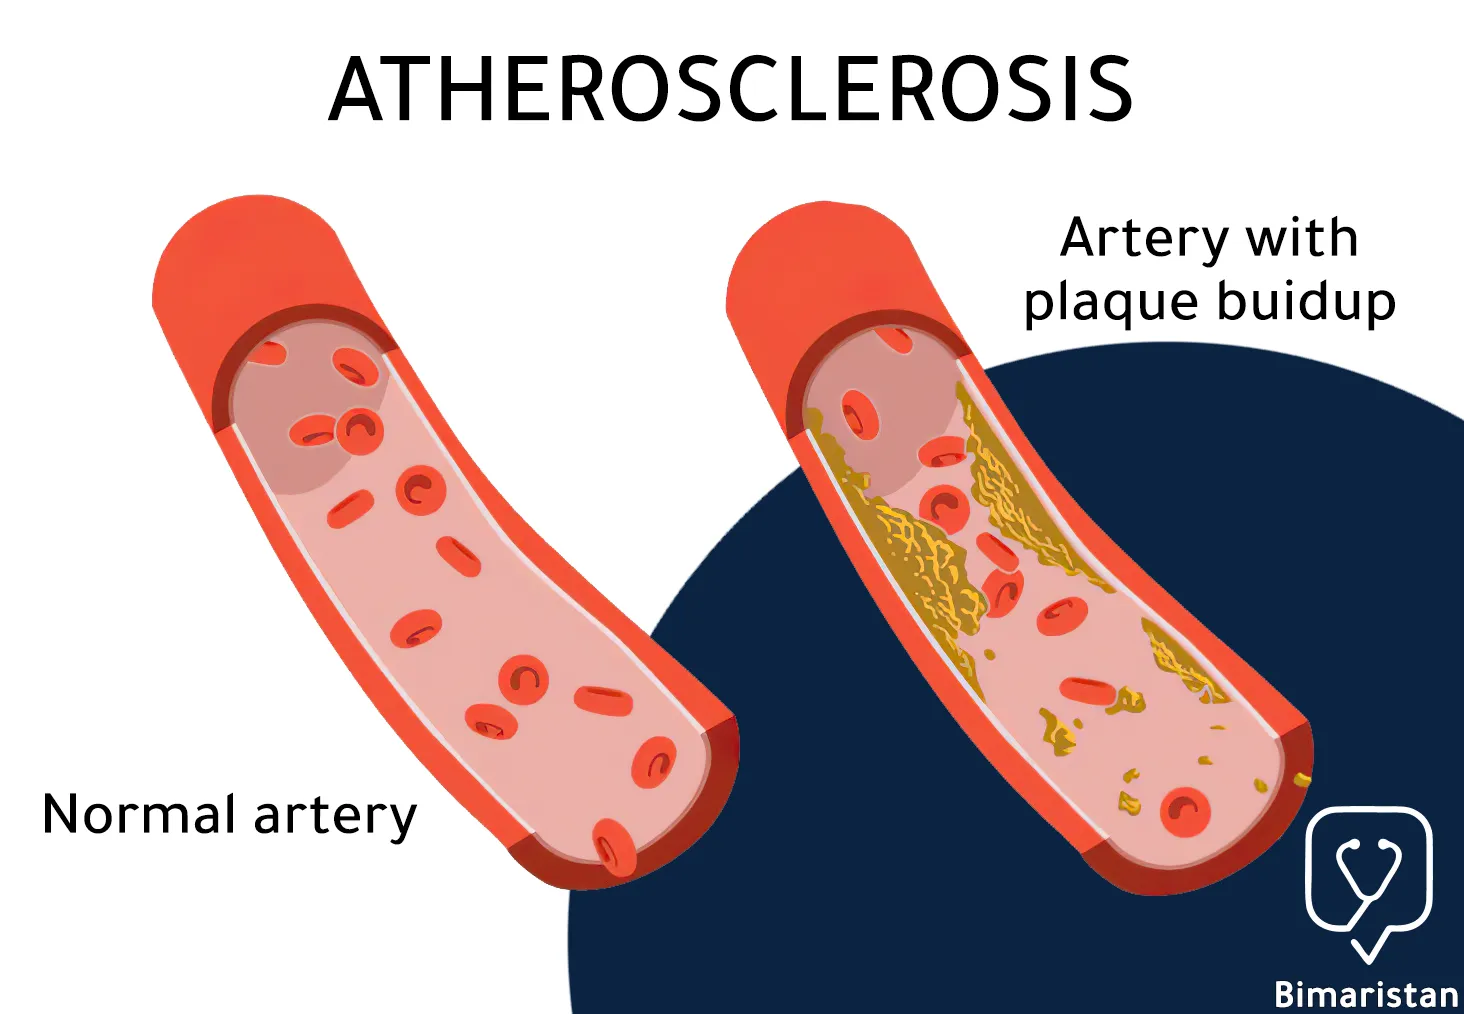 This picture shows the case of atherosclerosis, which manifests as a narrowing of the artery due to the accumulation of fatty plaques around the vessel wall, which requires the installation of a stent to widen the artery.